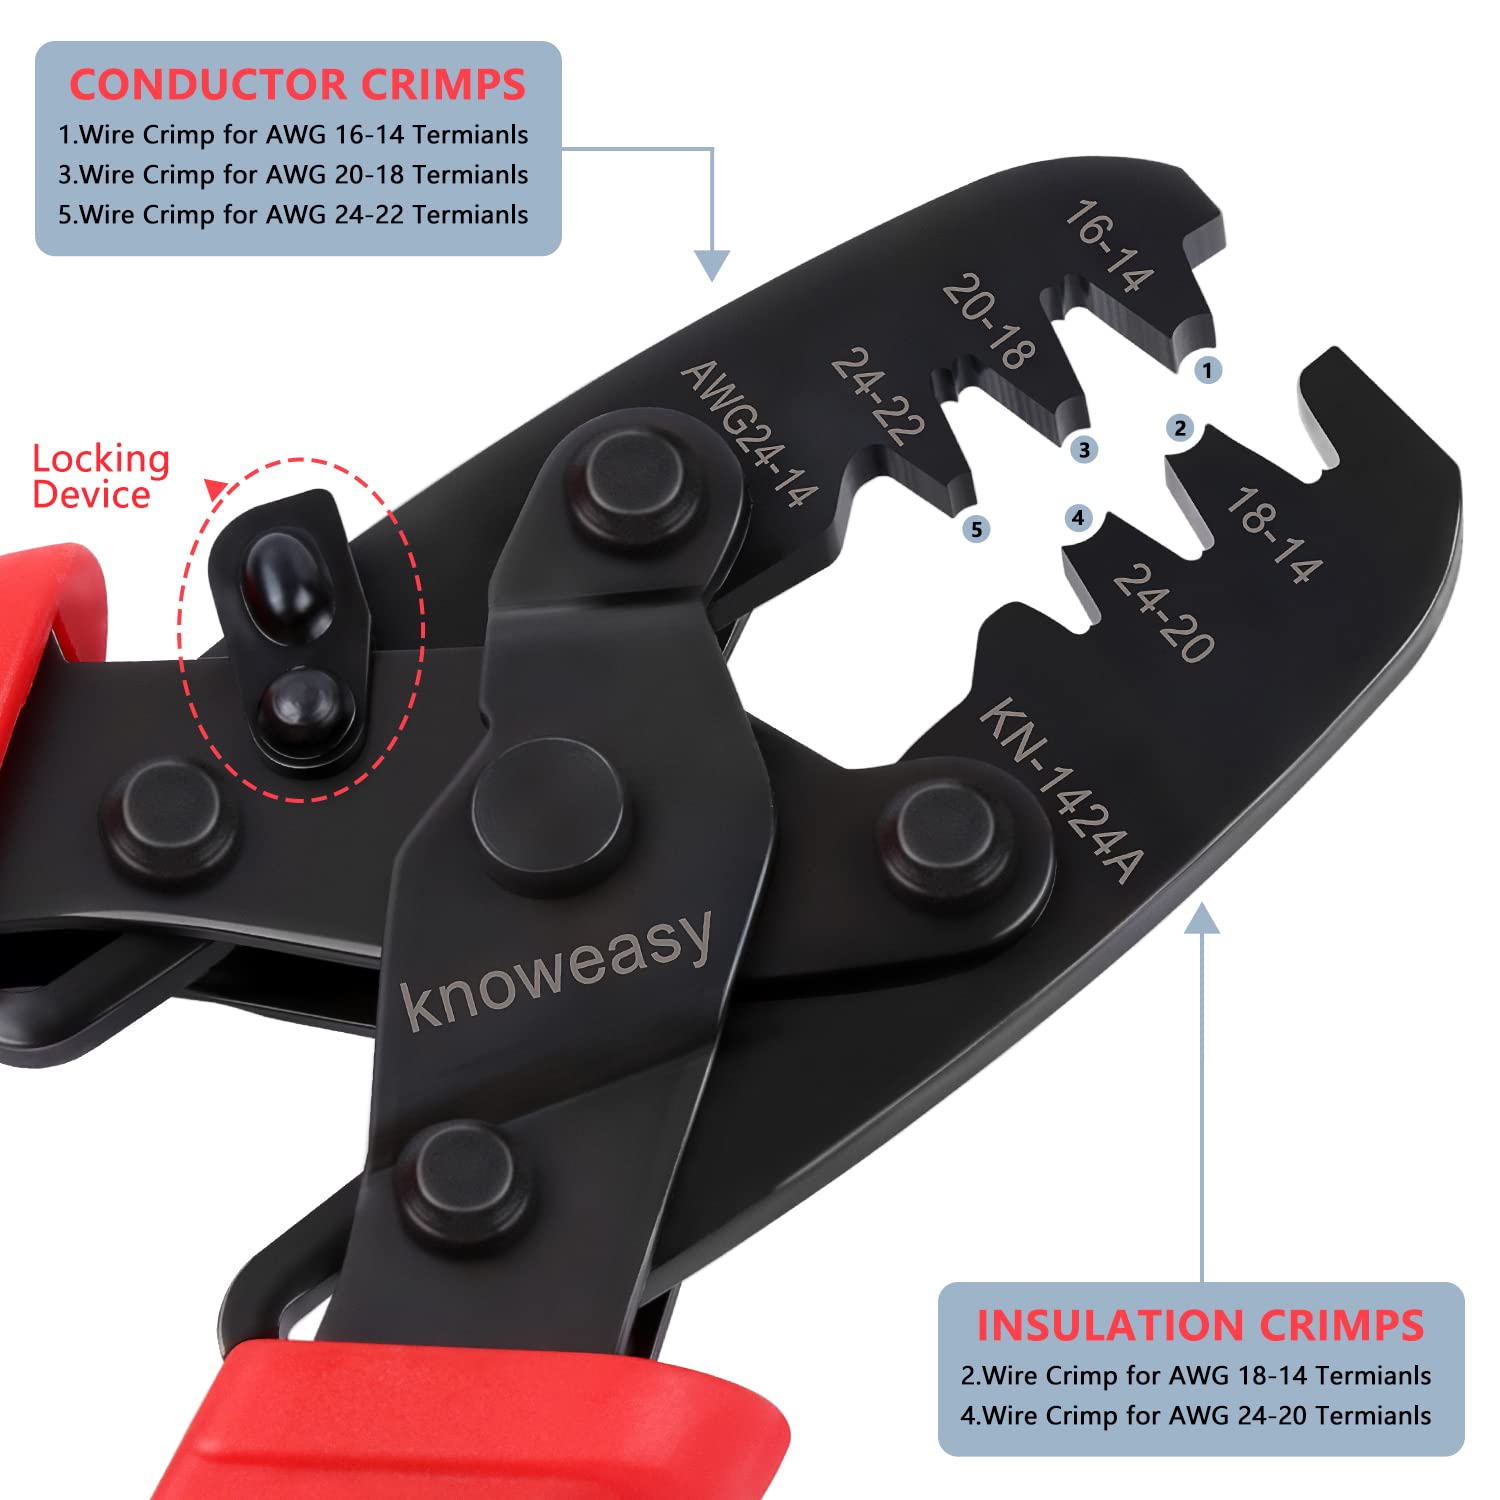 Knoweasy JST Crimper and Molex Crimper Compatible with Deutsch DT Series Stamped or Formed Contact,Molex, Delphi, Amp, Tyco, Harley, PC, Automotive - AWG 24-14 Wire Crimper